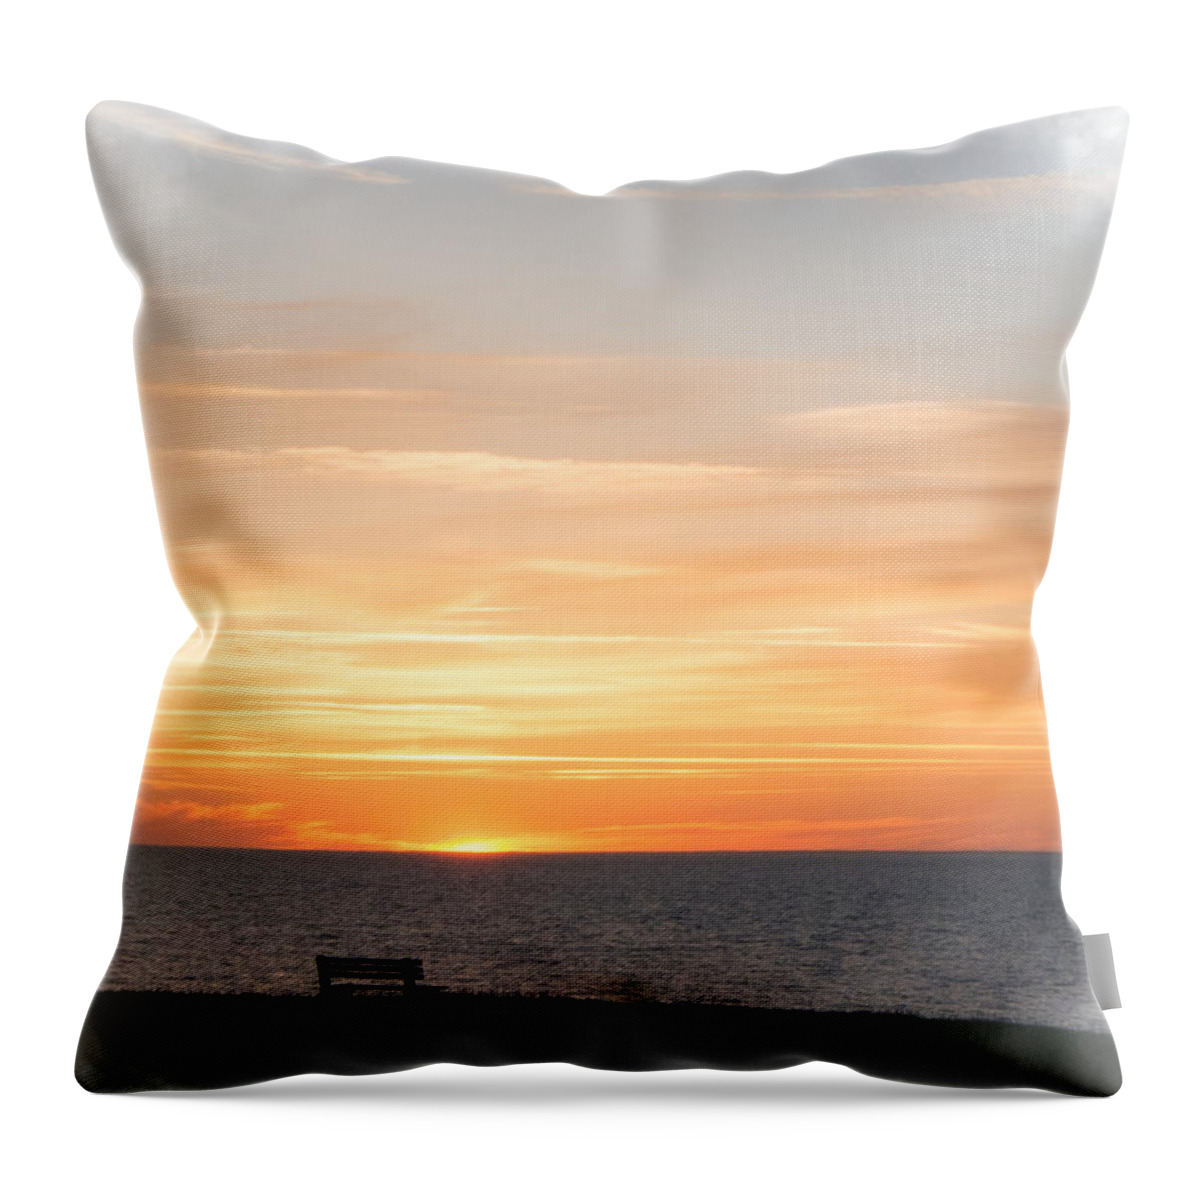 Orange Throw Pillow featuring the mixed media Solitary Sunset by Moira Law